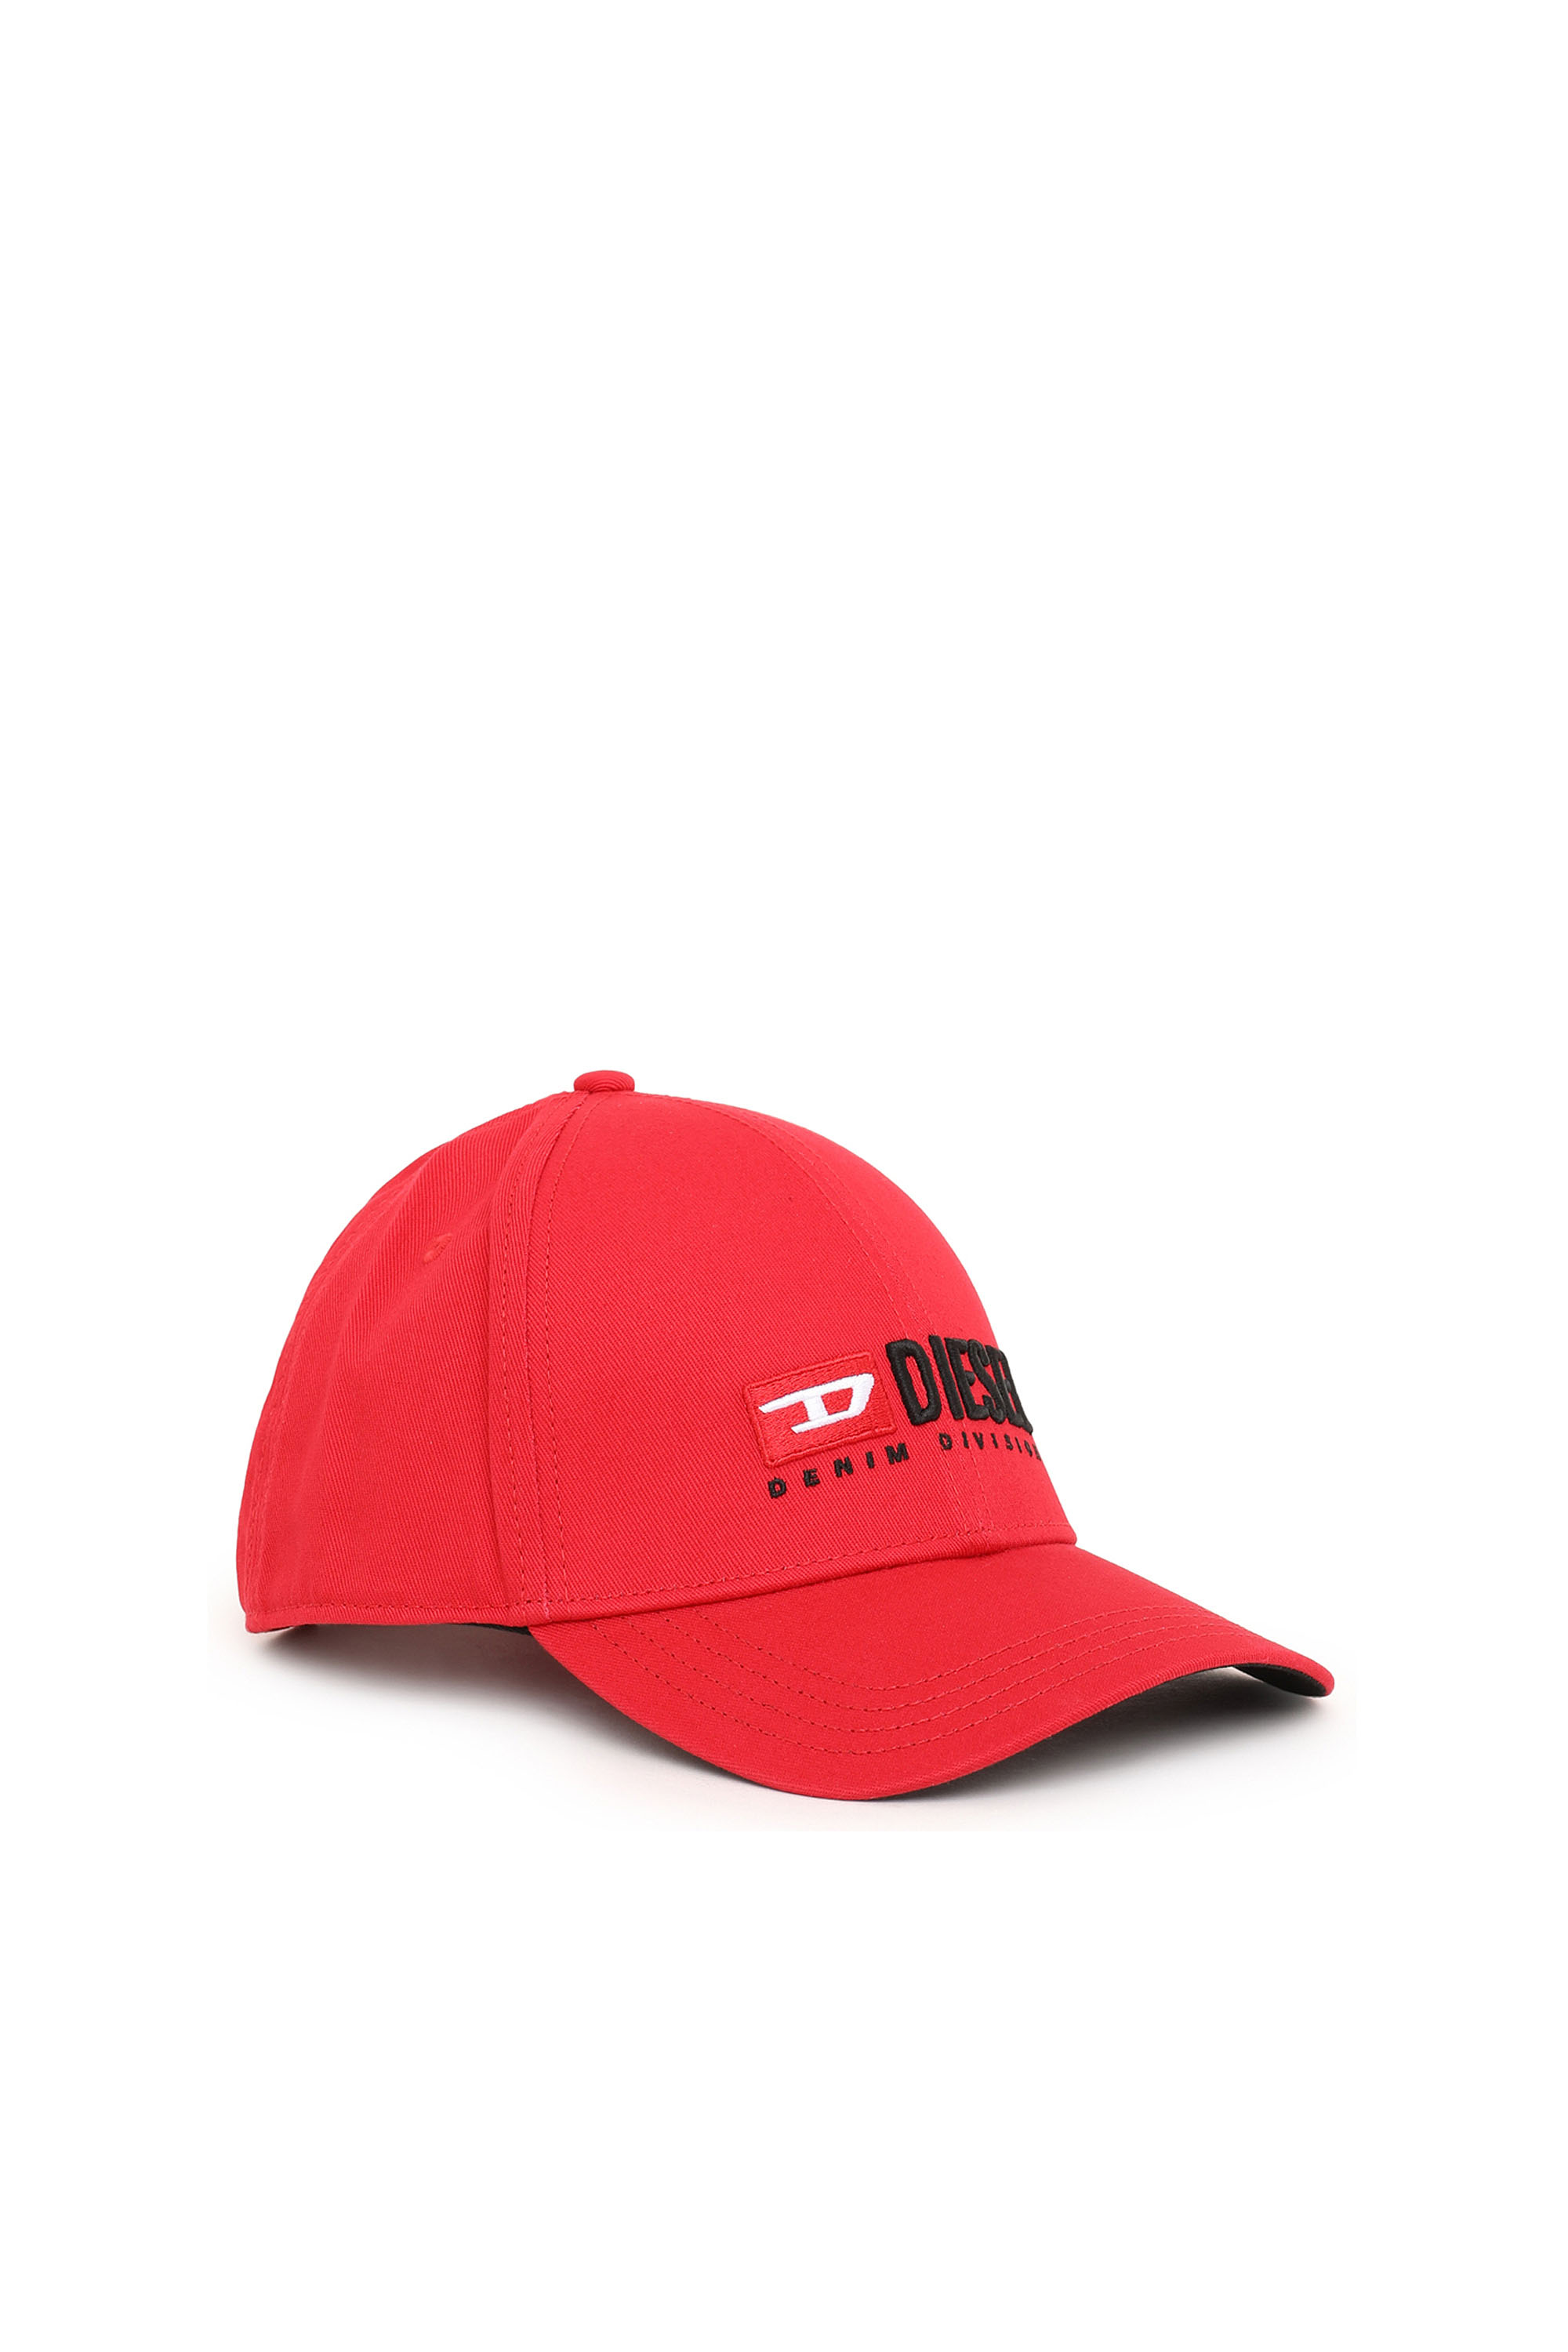 Diesel - CORRY-DIV, Unisex Baseball cap with Denim Division logo in Red - Image 1